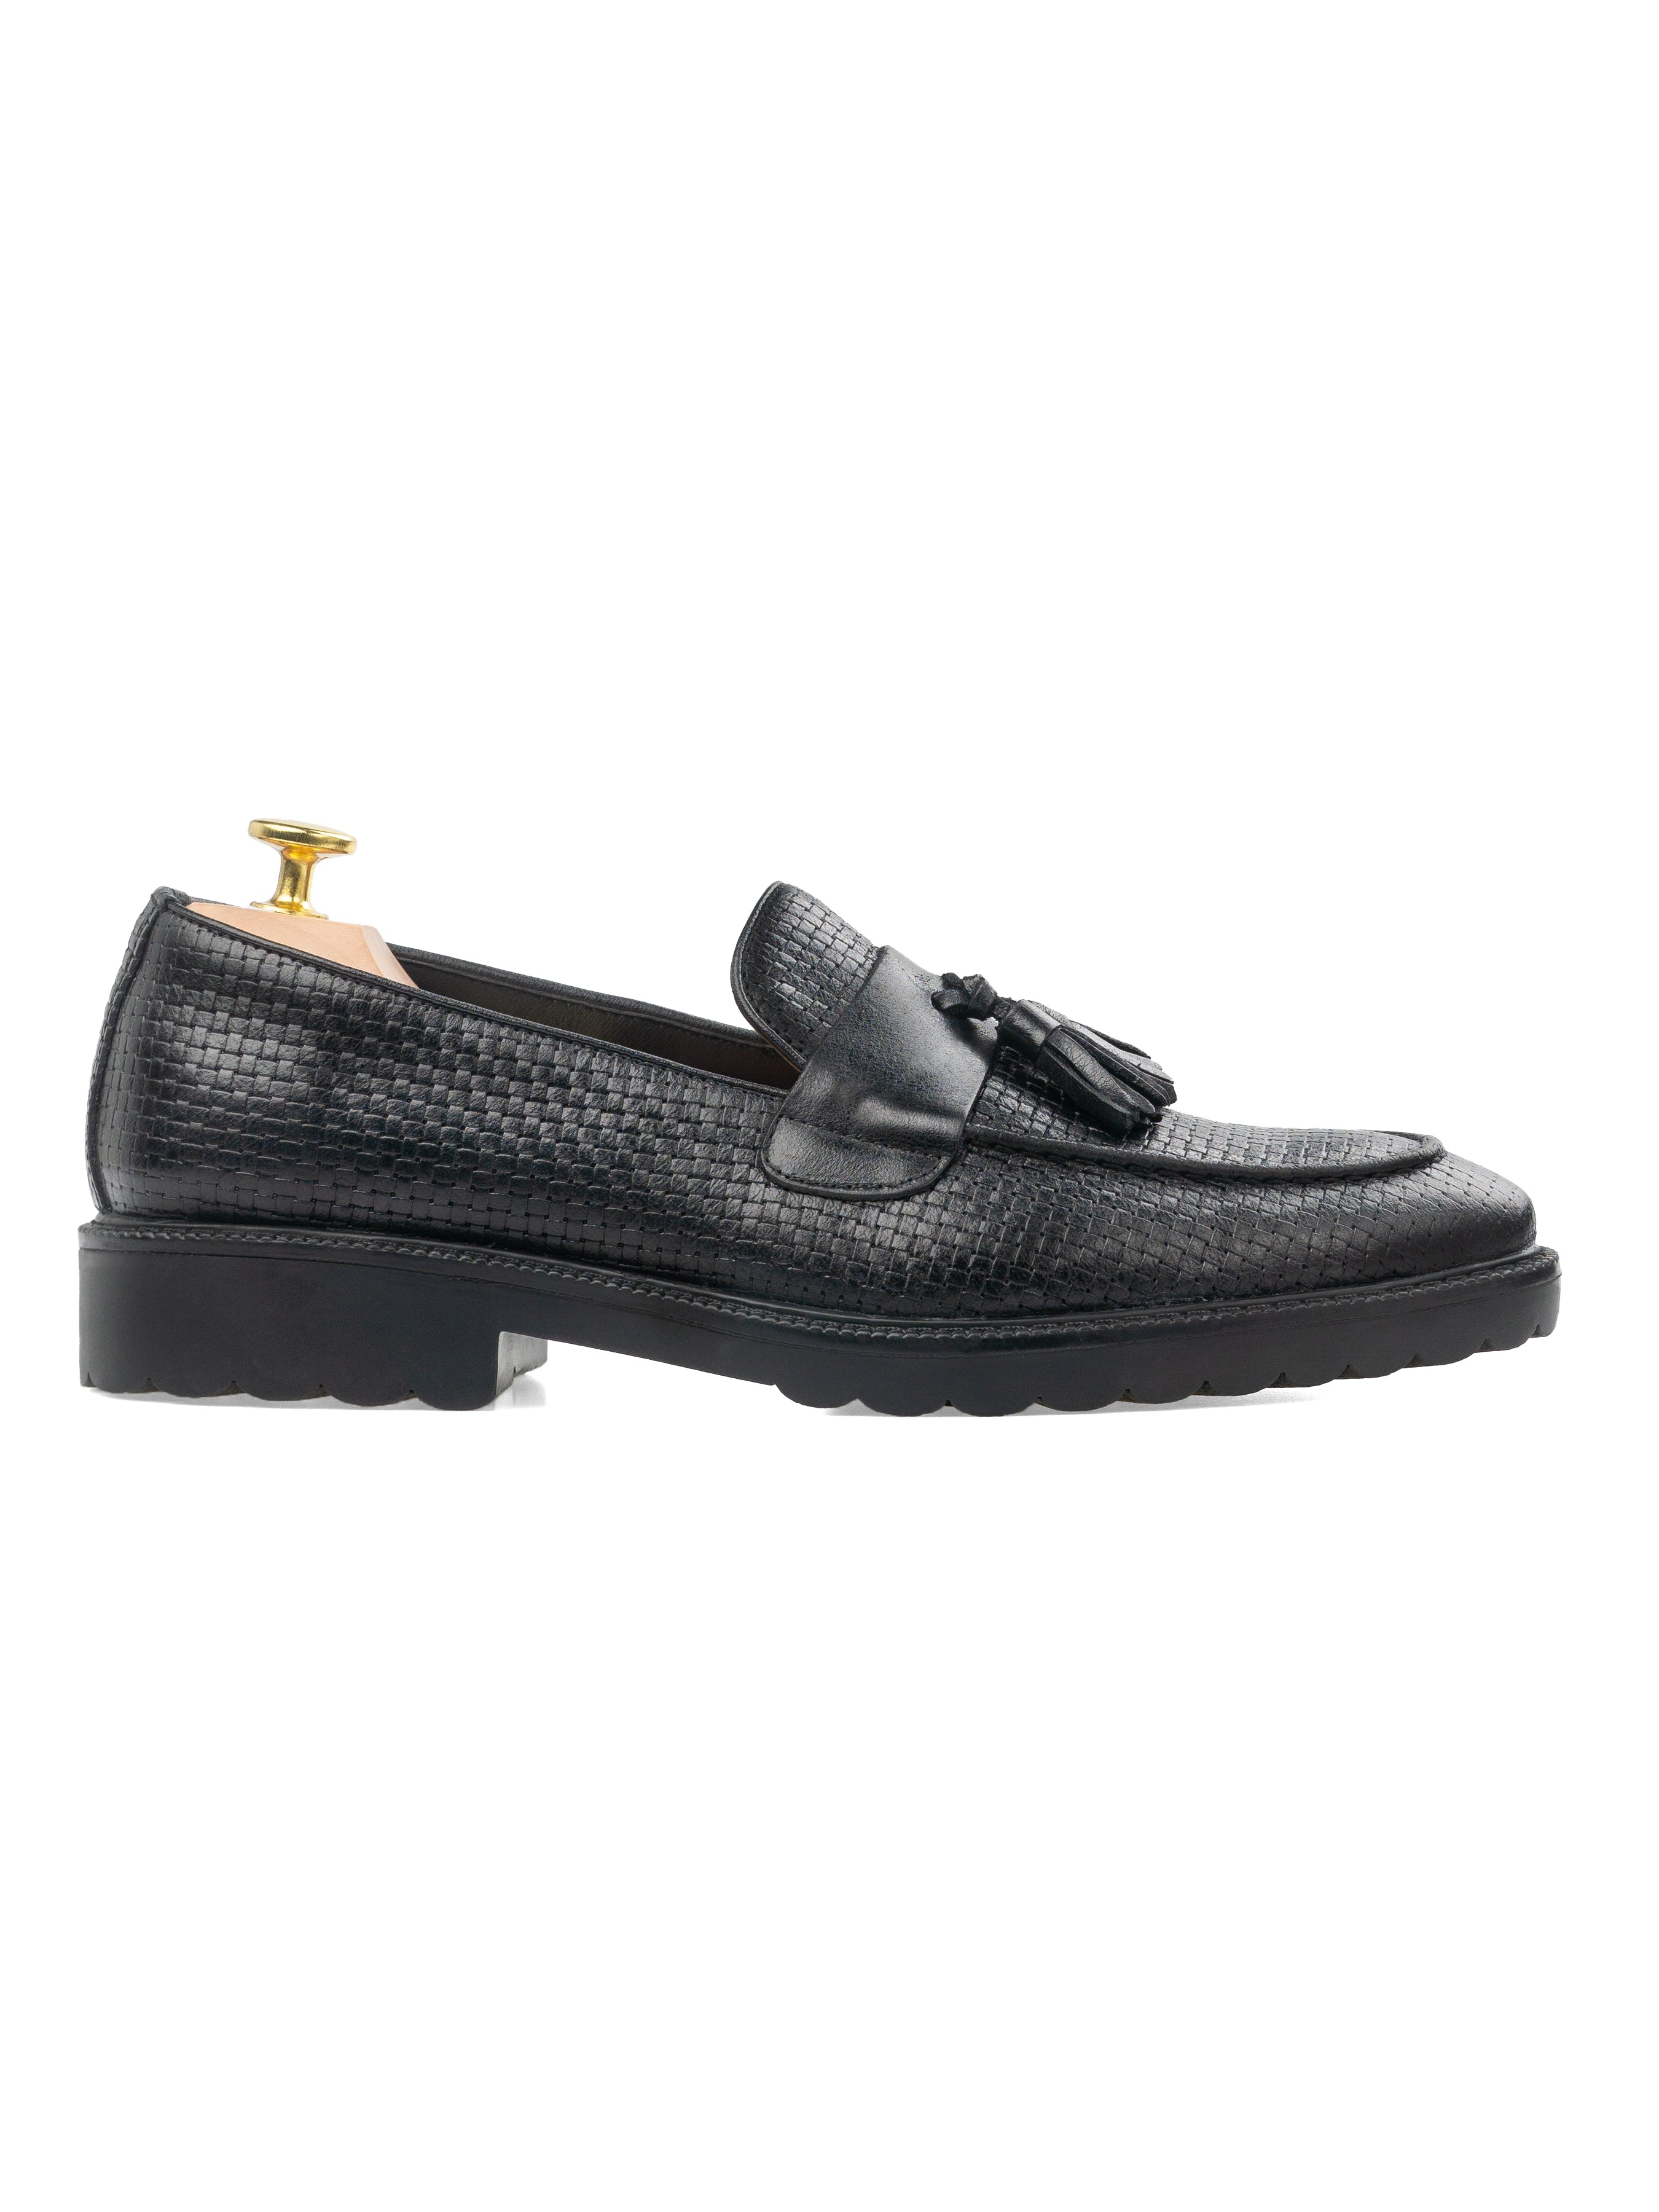 Rocky Tassel Loafer - Black Woven Leather with Solid Strap (Combat Sole)